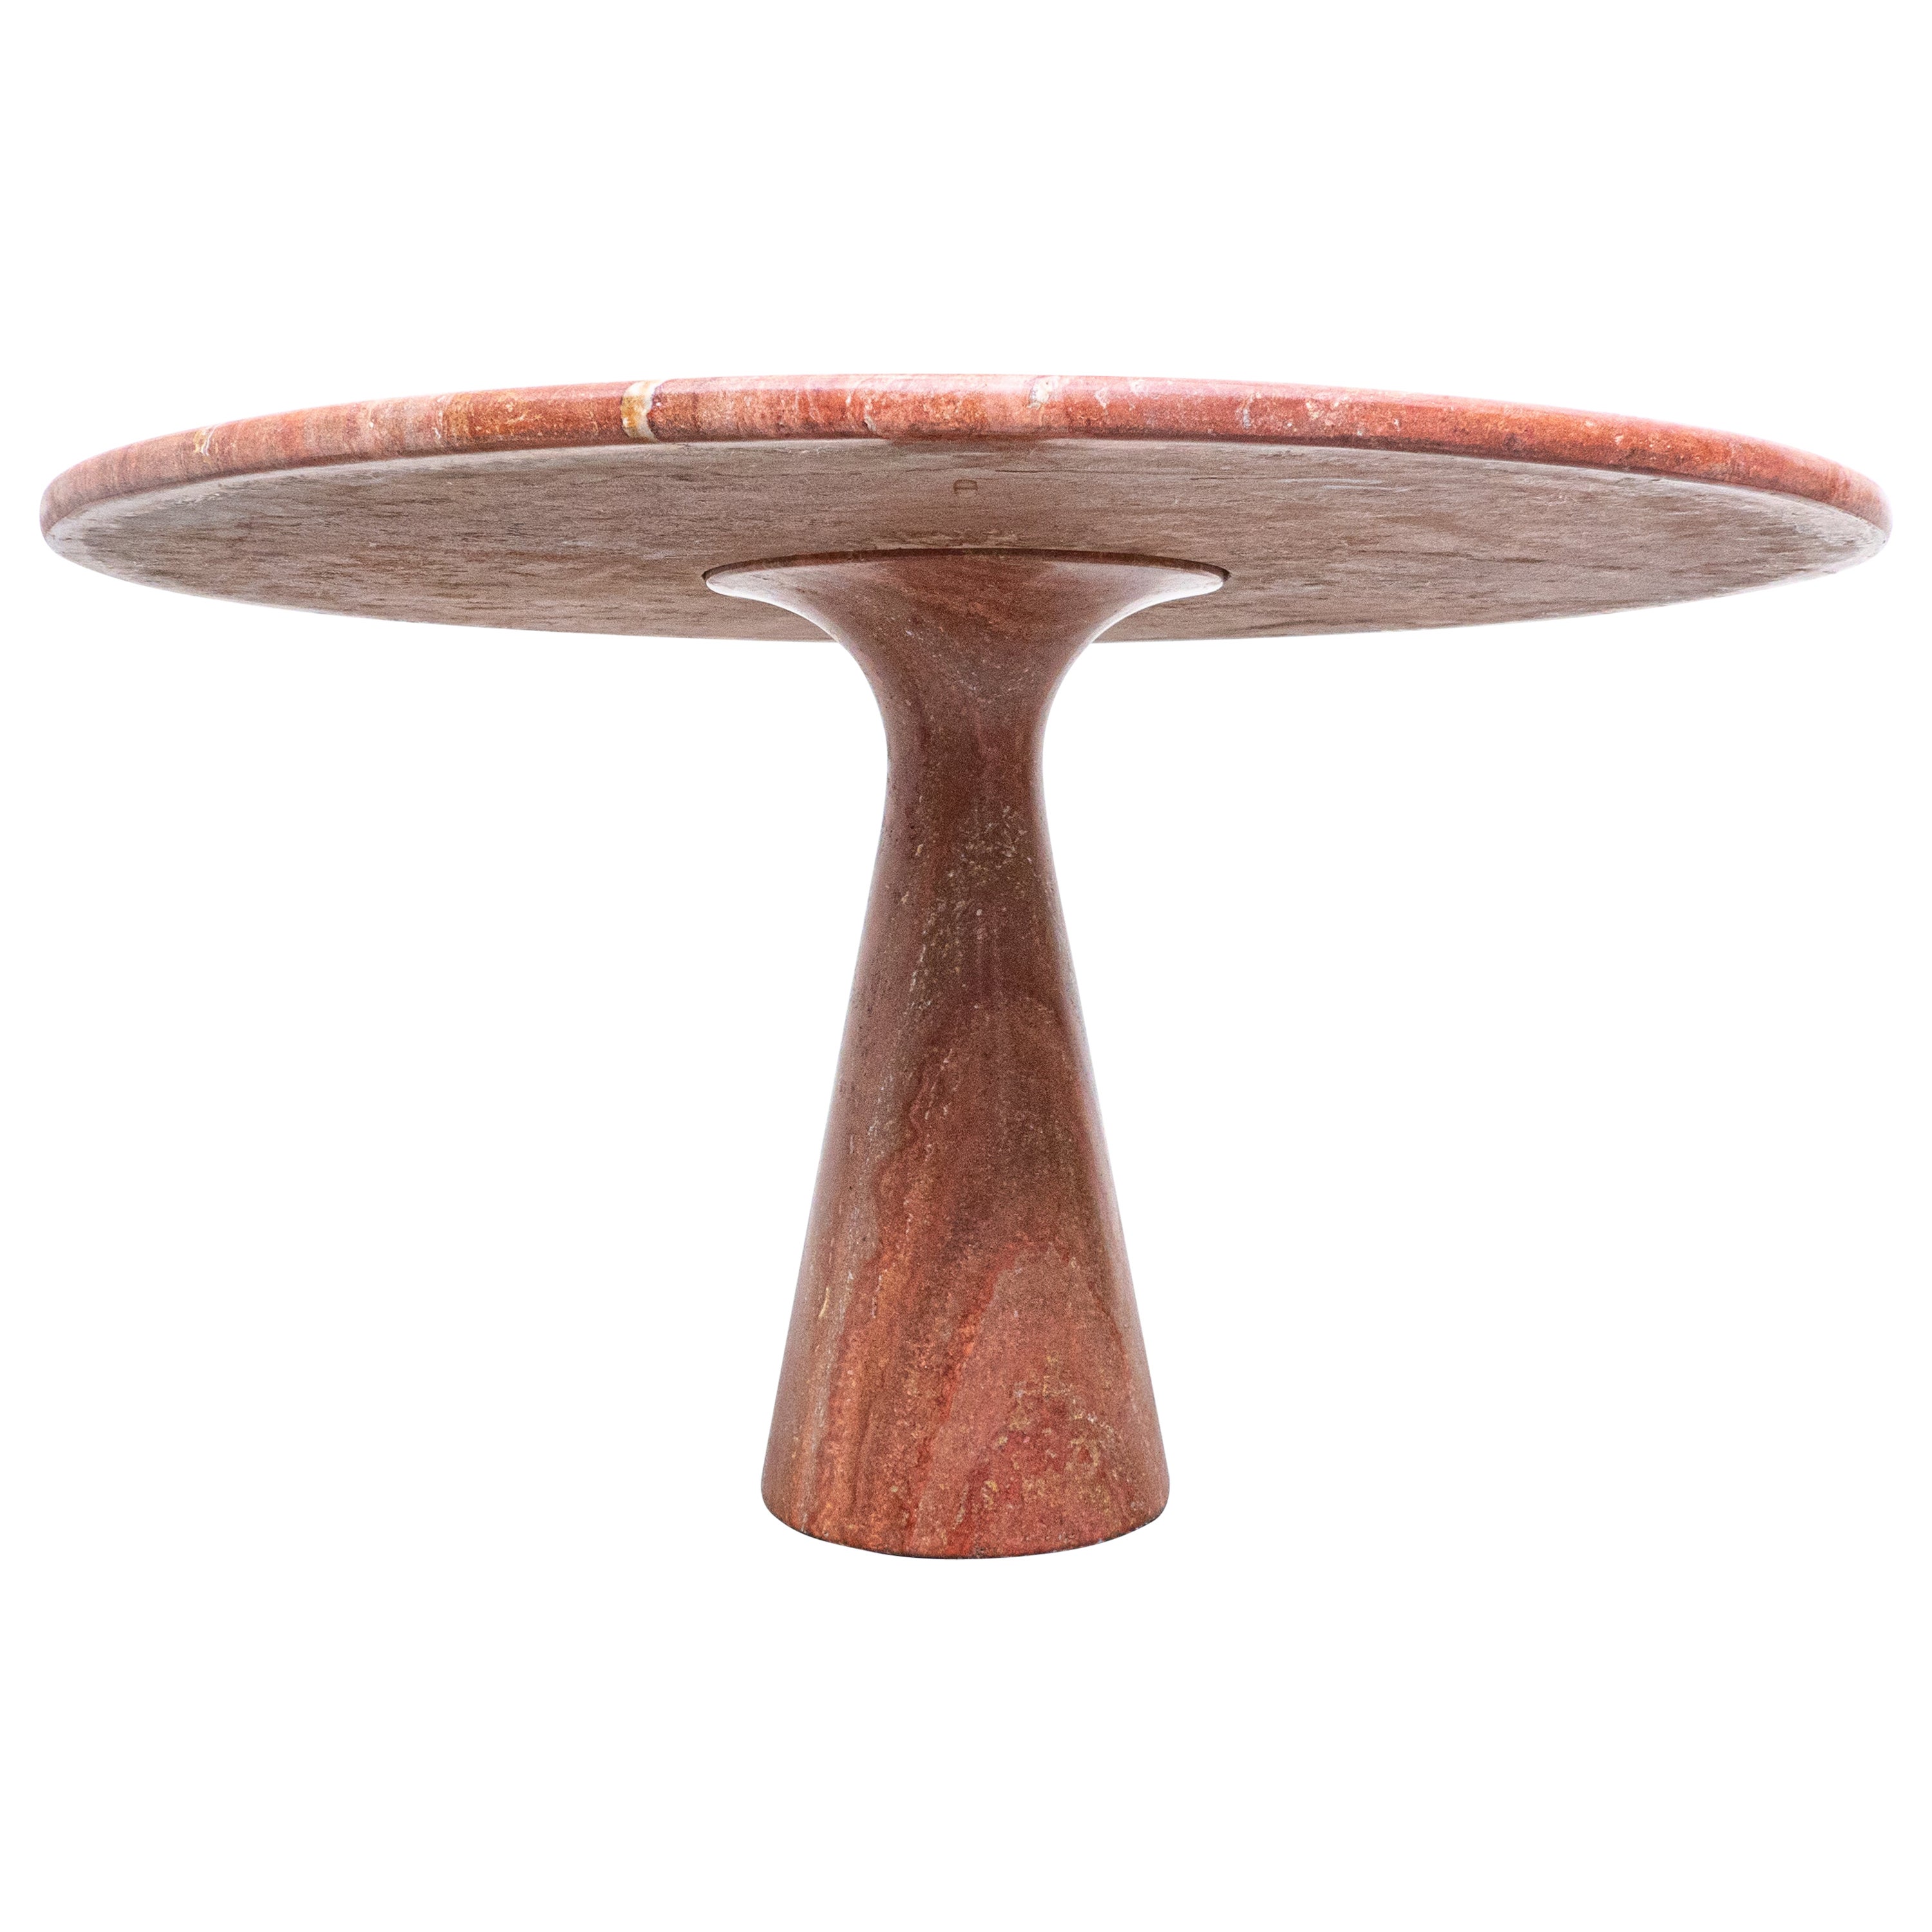 Mid-Century Modern red travertine dining table by Angelo Mangiarotti, Italy, 1970s.